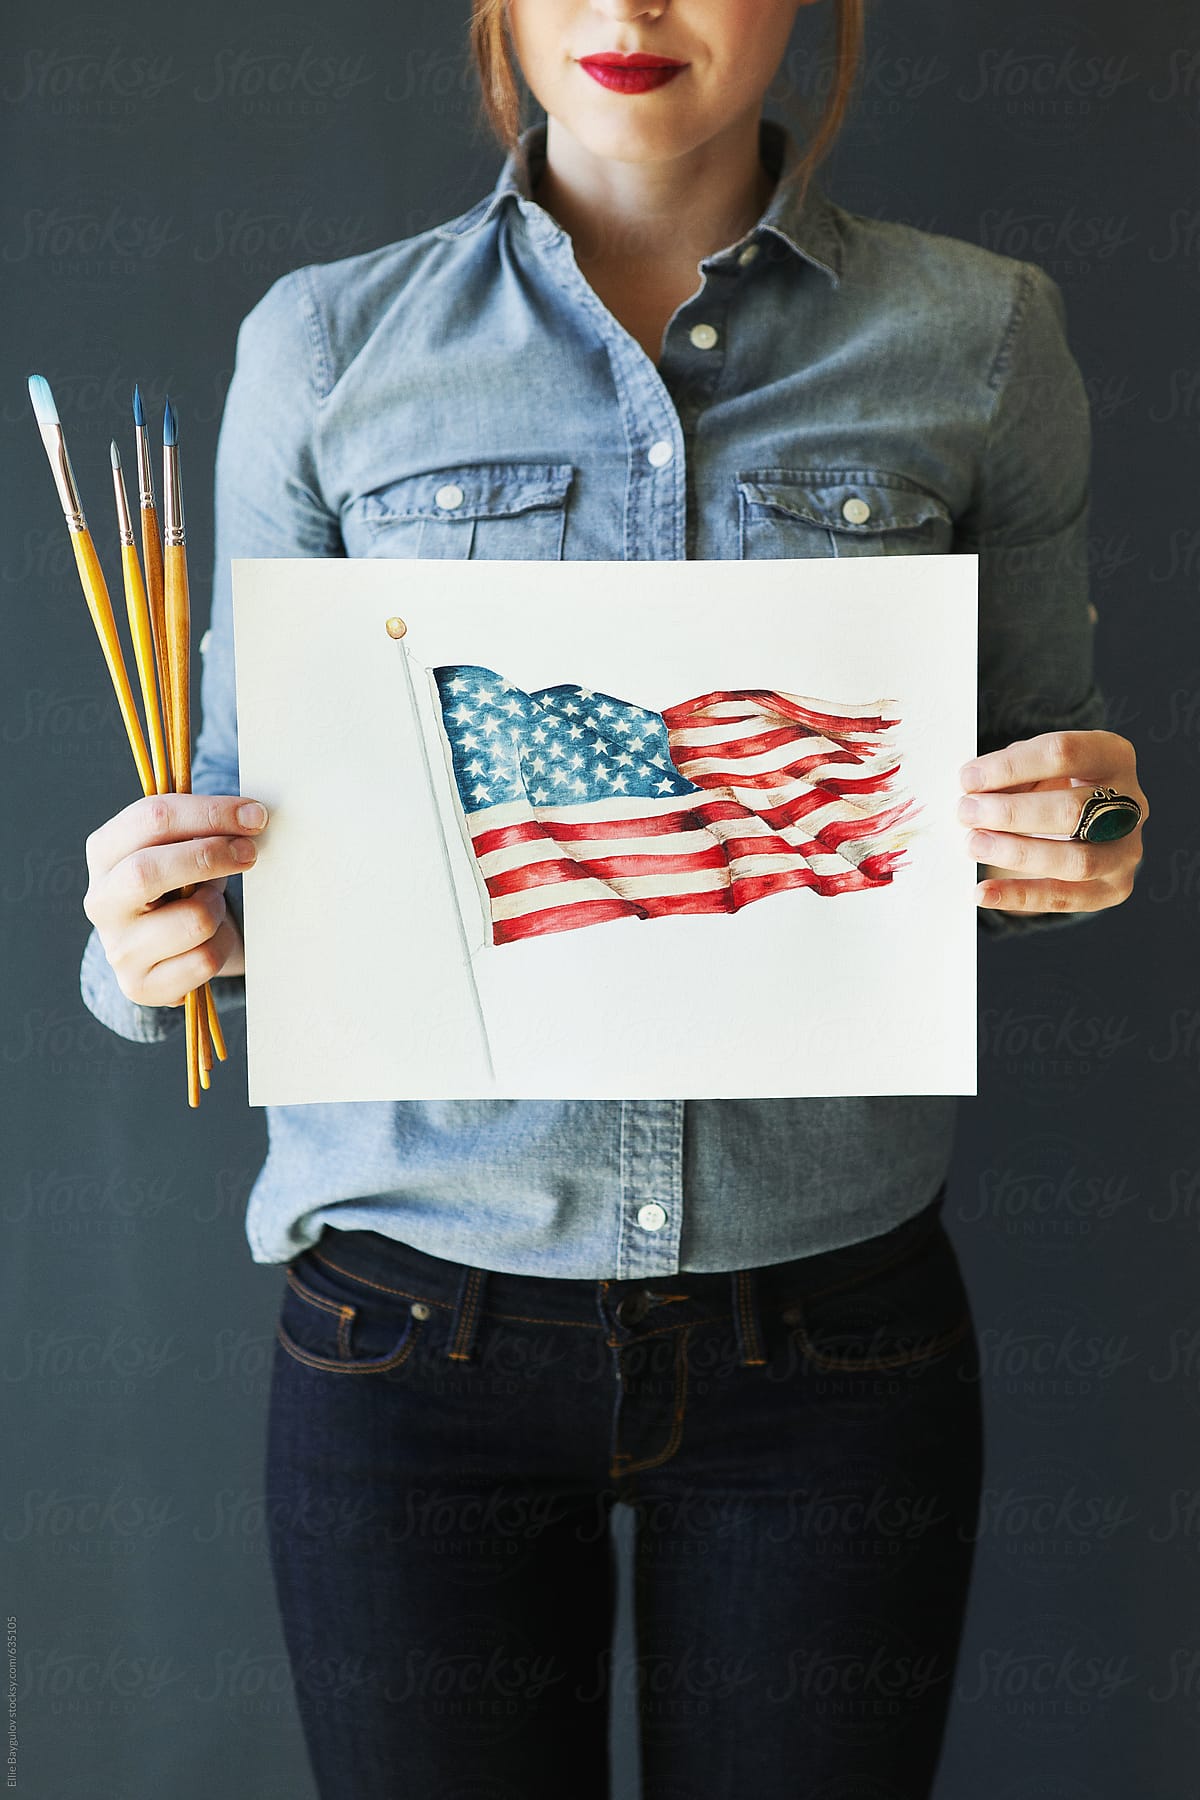 Girl holding an american flag painting